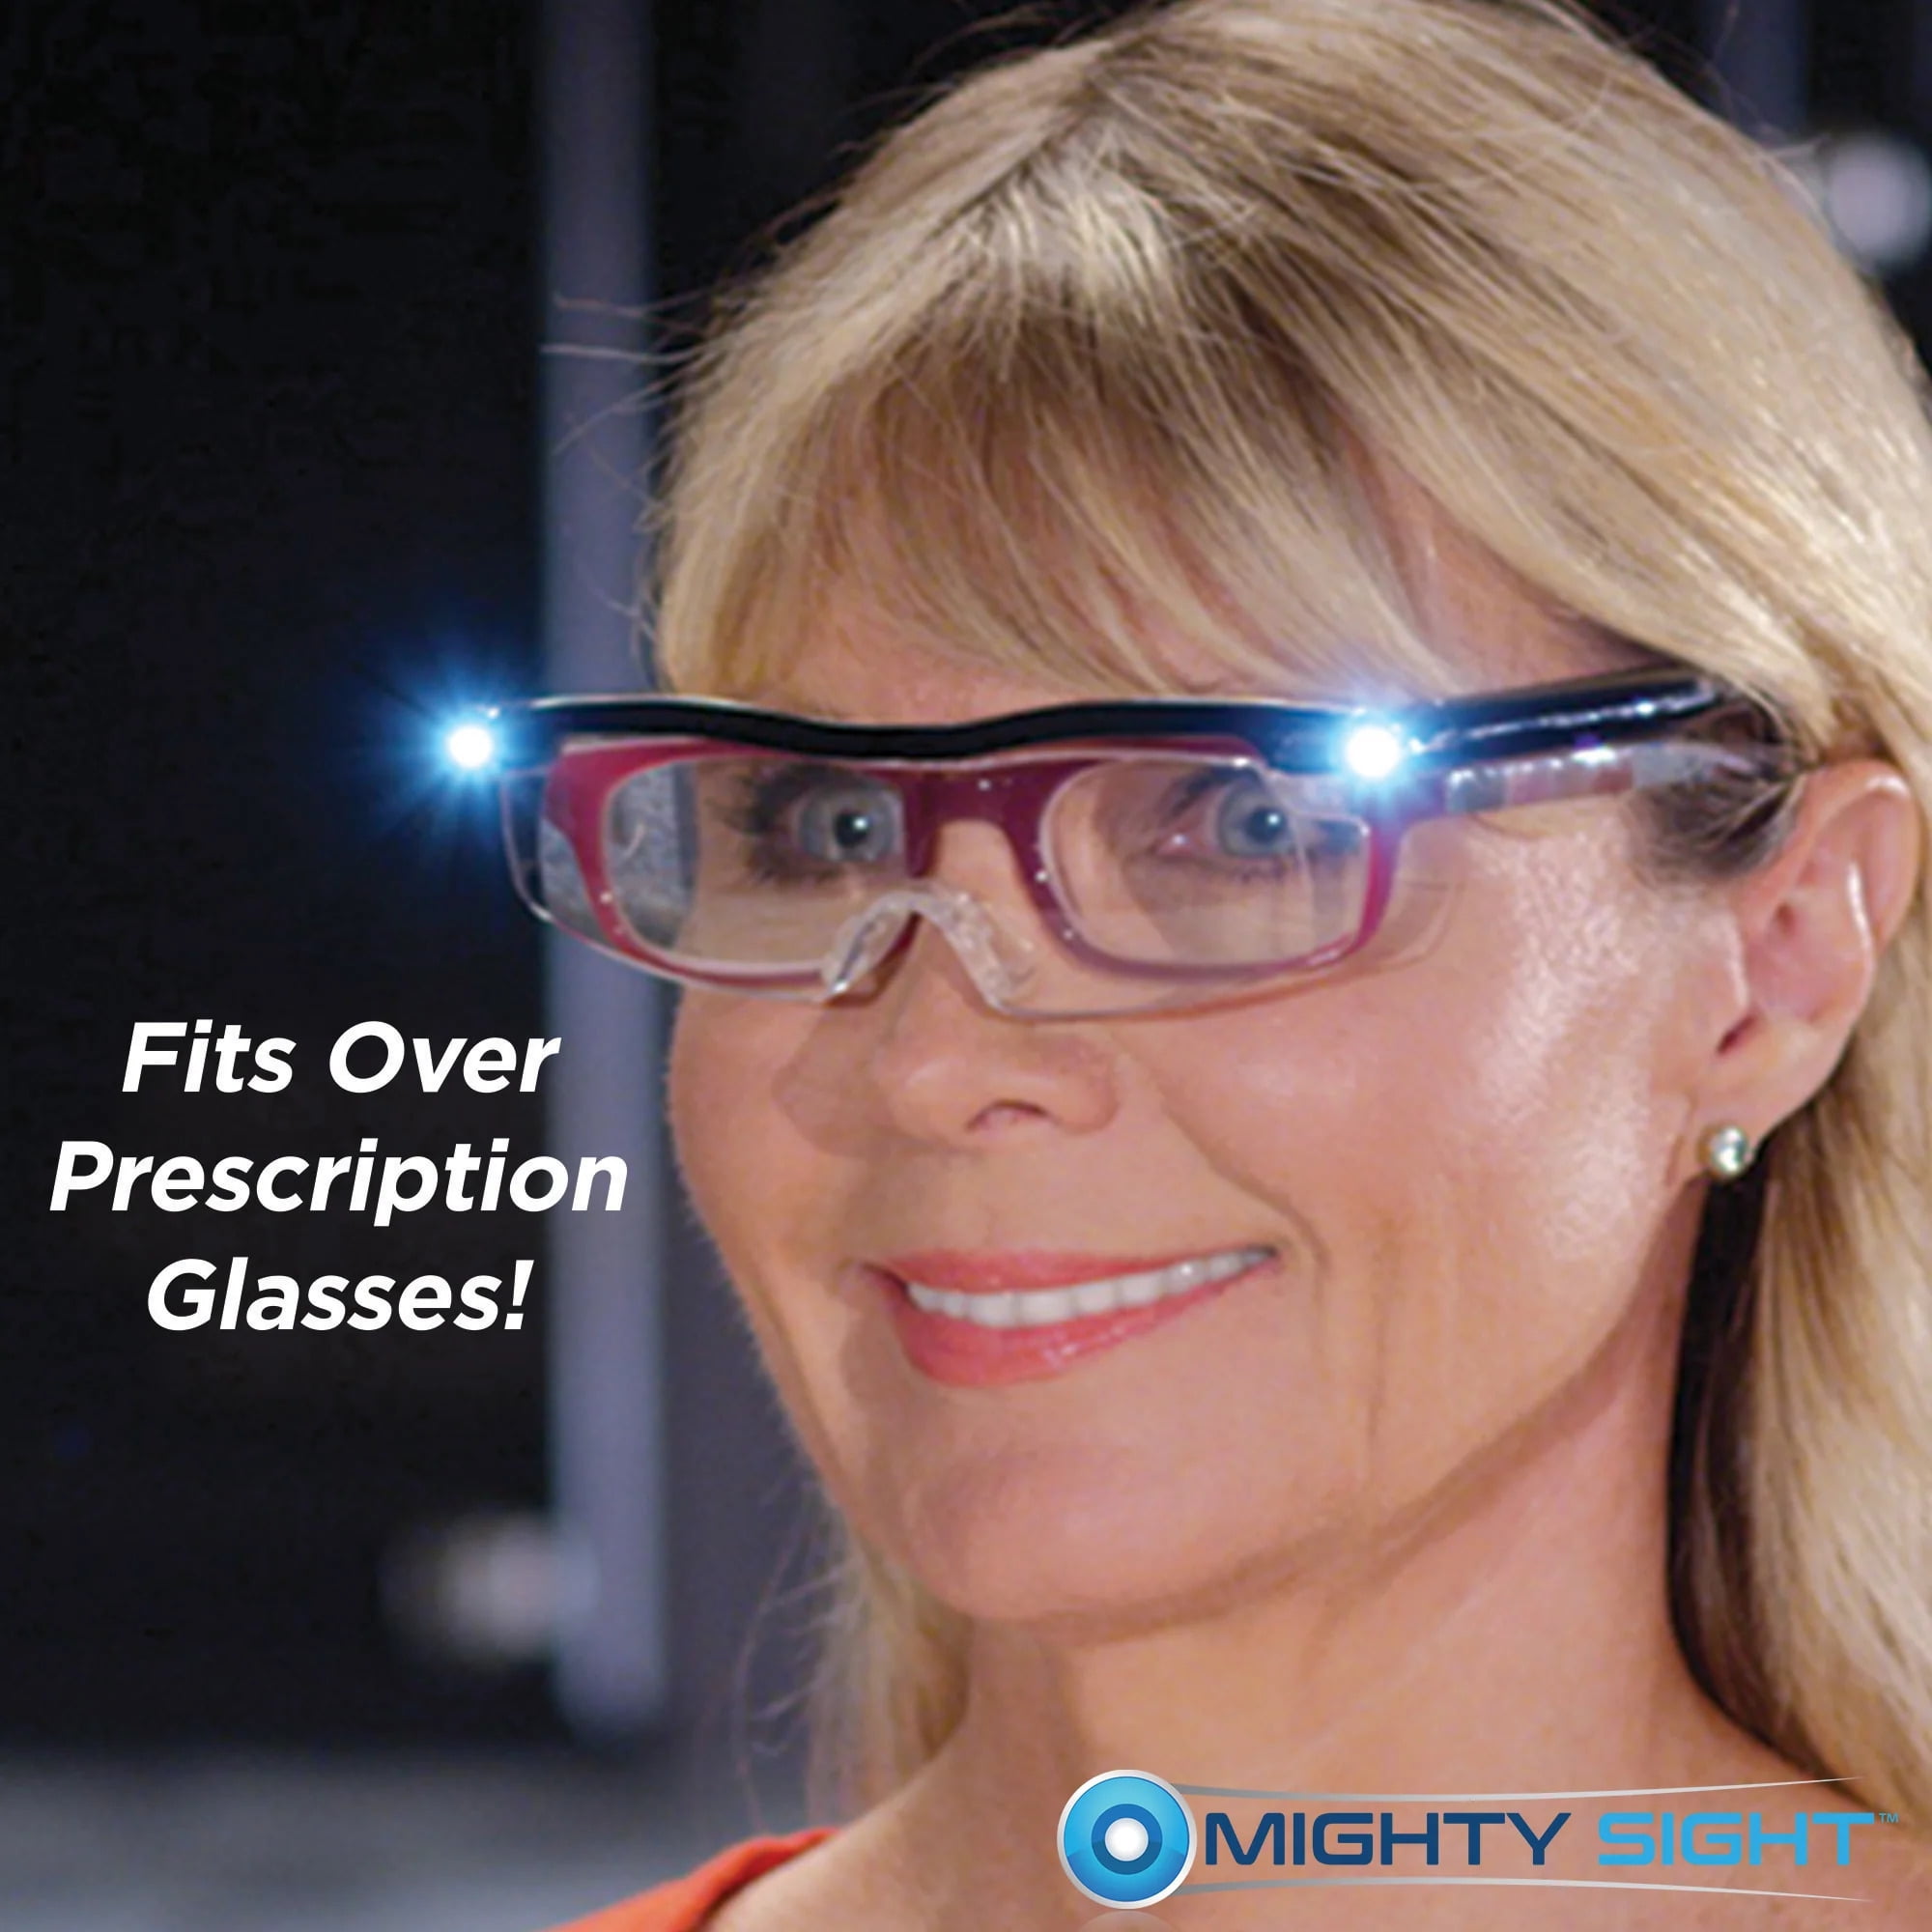 Mighty Sight Unisex Design Hands-free Magnifying Eyewear 160% Magnification  Eyeglasses that Fits Prescription Glasses : : Health & Personal  Care